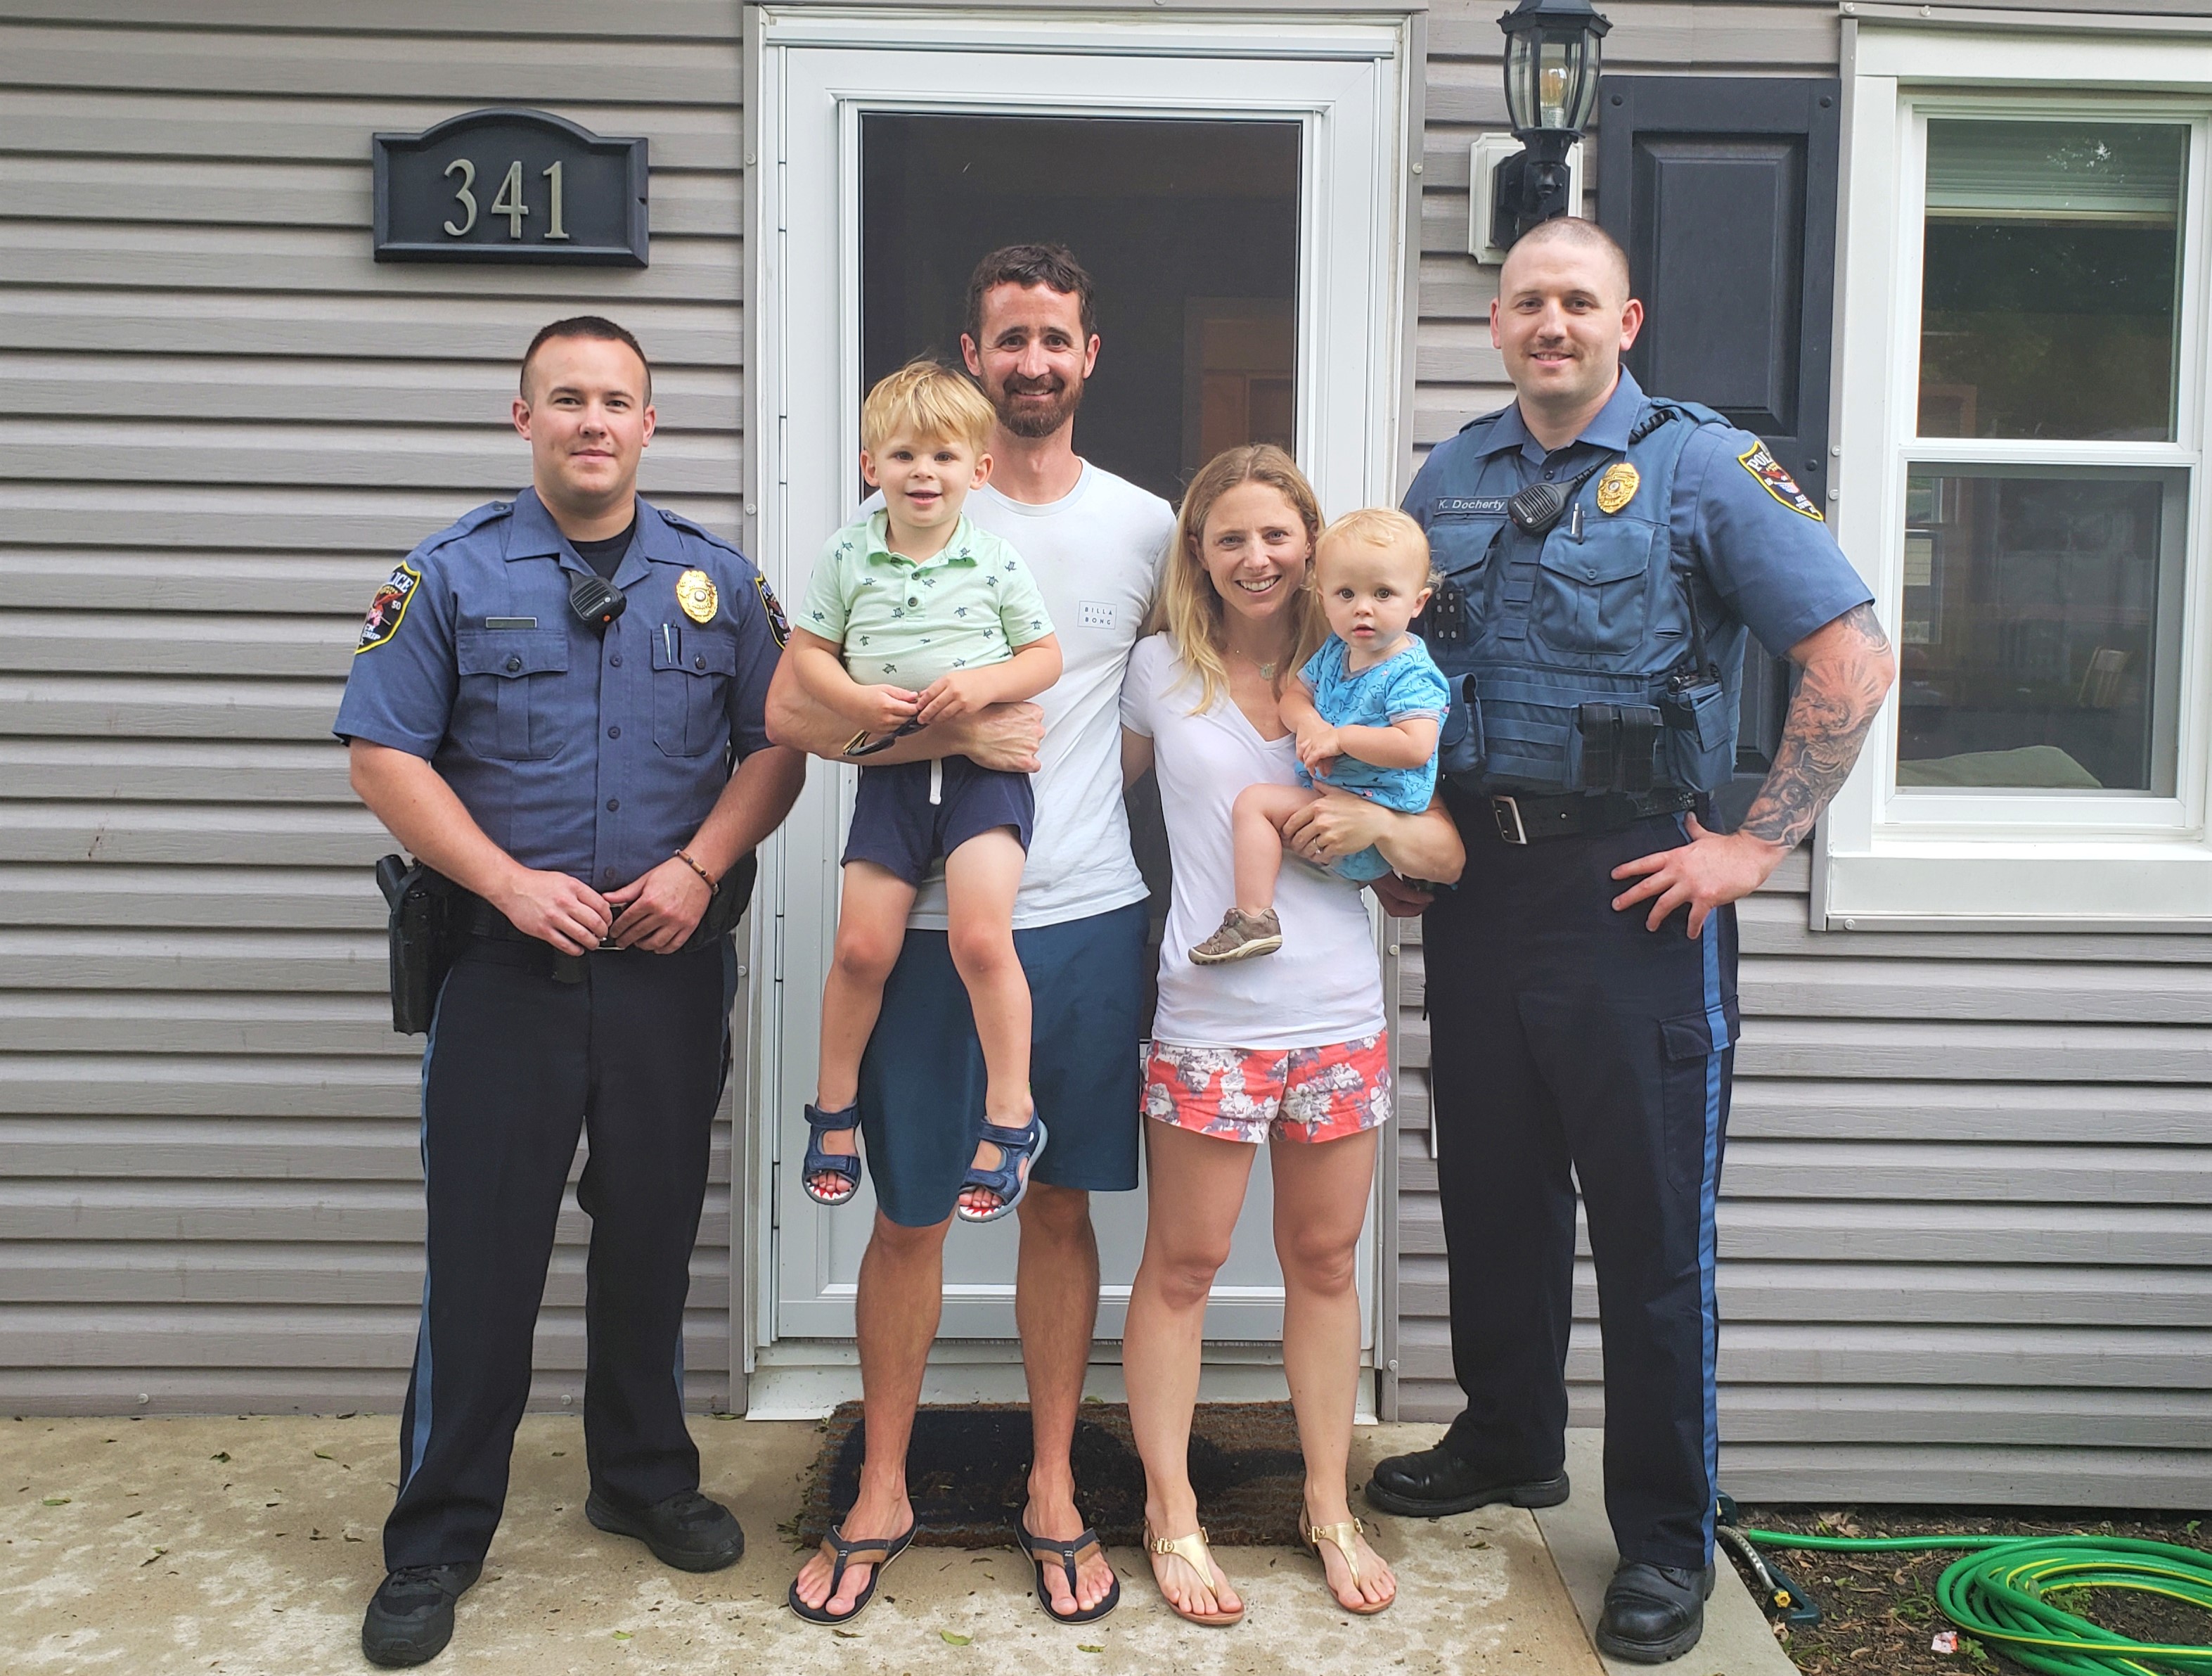 Brick police officers and the Travers family are reunited after their son was saved after choking. (Photo: Brick Twp. Police)